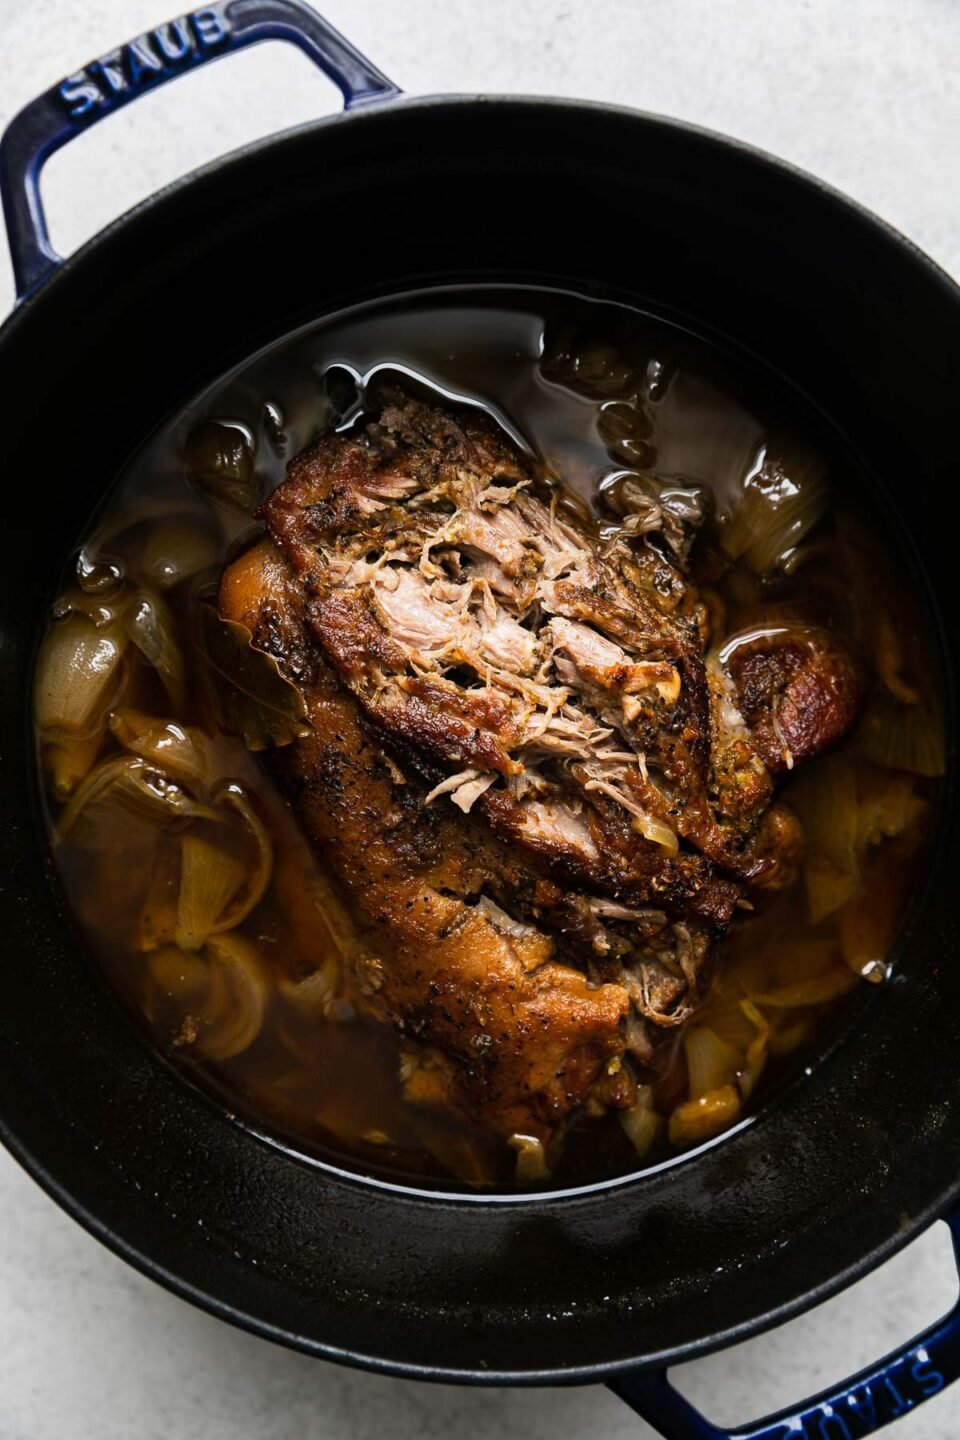 Cooked pork carnitas in a beer braise fill a dark navy Staub dutch oven. The braised carnitas have been slightly shredded on the top to check for doneness. The dutch oven sits atop a creamy white textured surface.